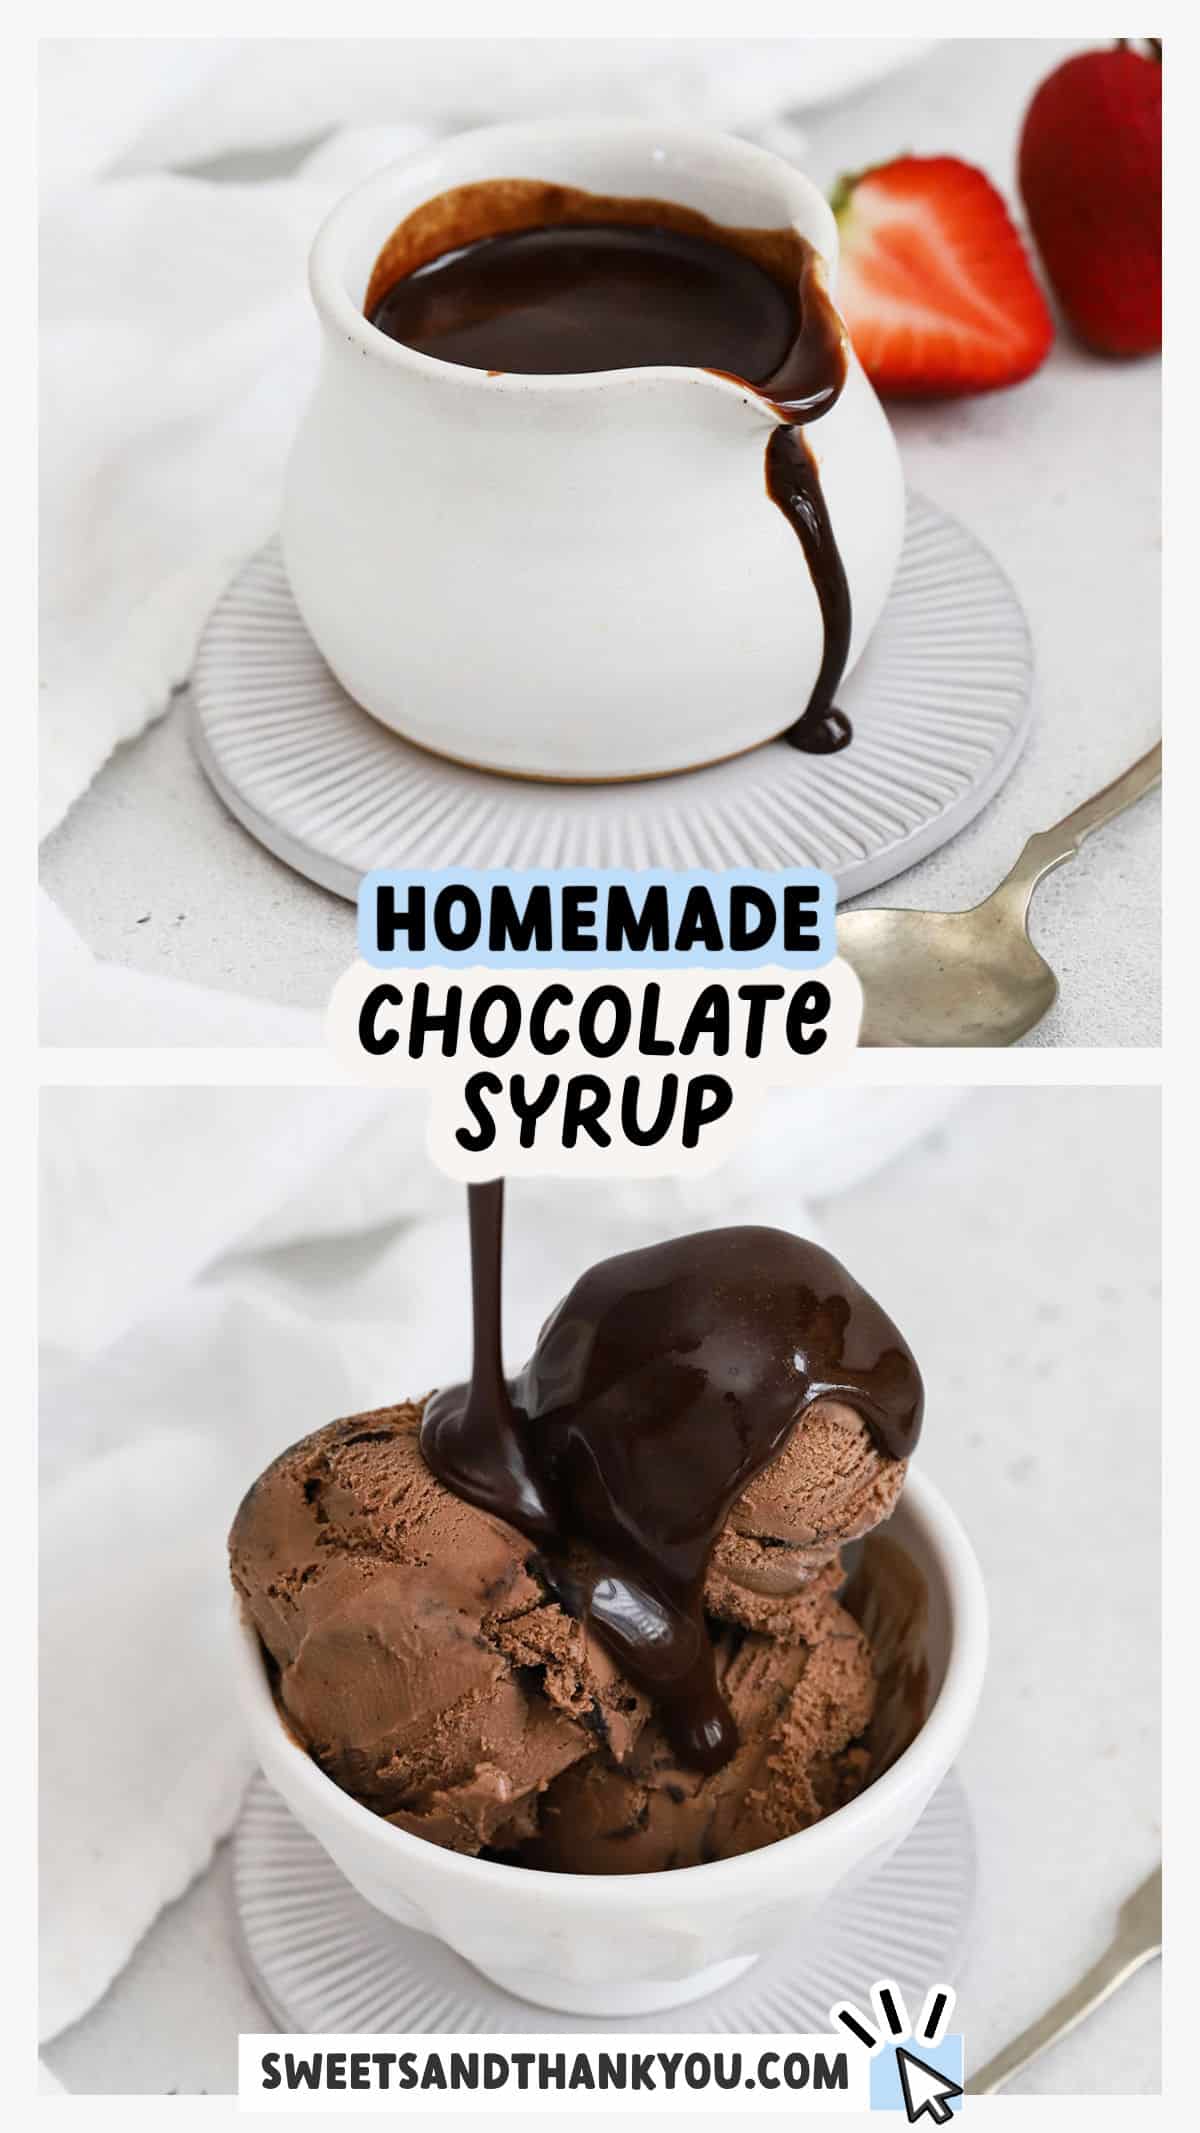 Learn how to make Homemade Chocolate Syrup! This easy chocolate sauce recipe is perfect for ice cream, chocolate milk, and so much more. It's like homemade Hershey's syrup! Get the recipe + TONS of delicious ways to use it at sweetsandthankyou.com